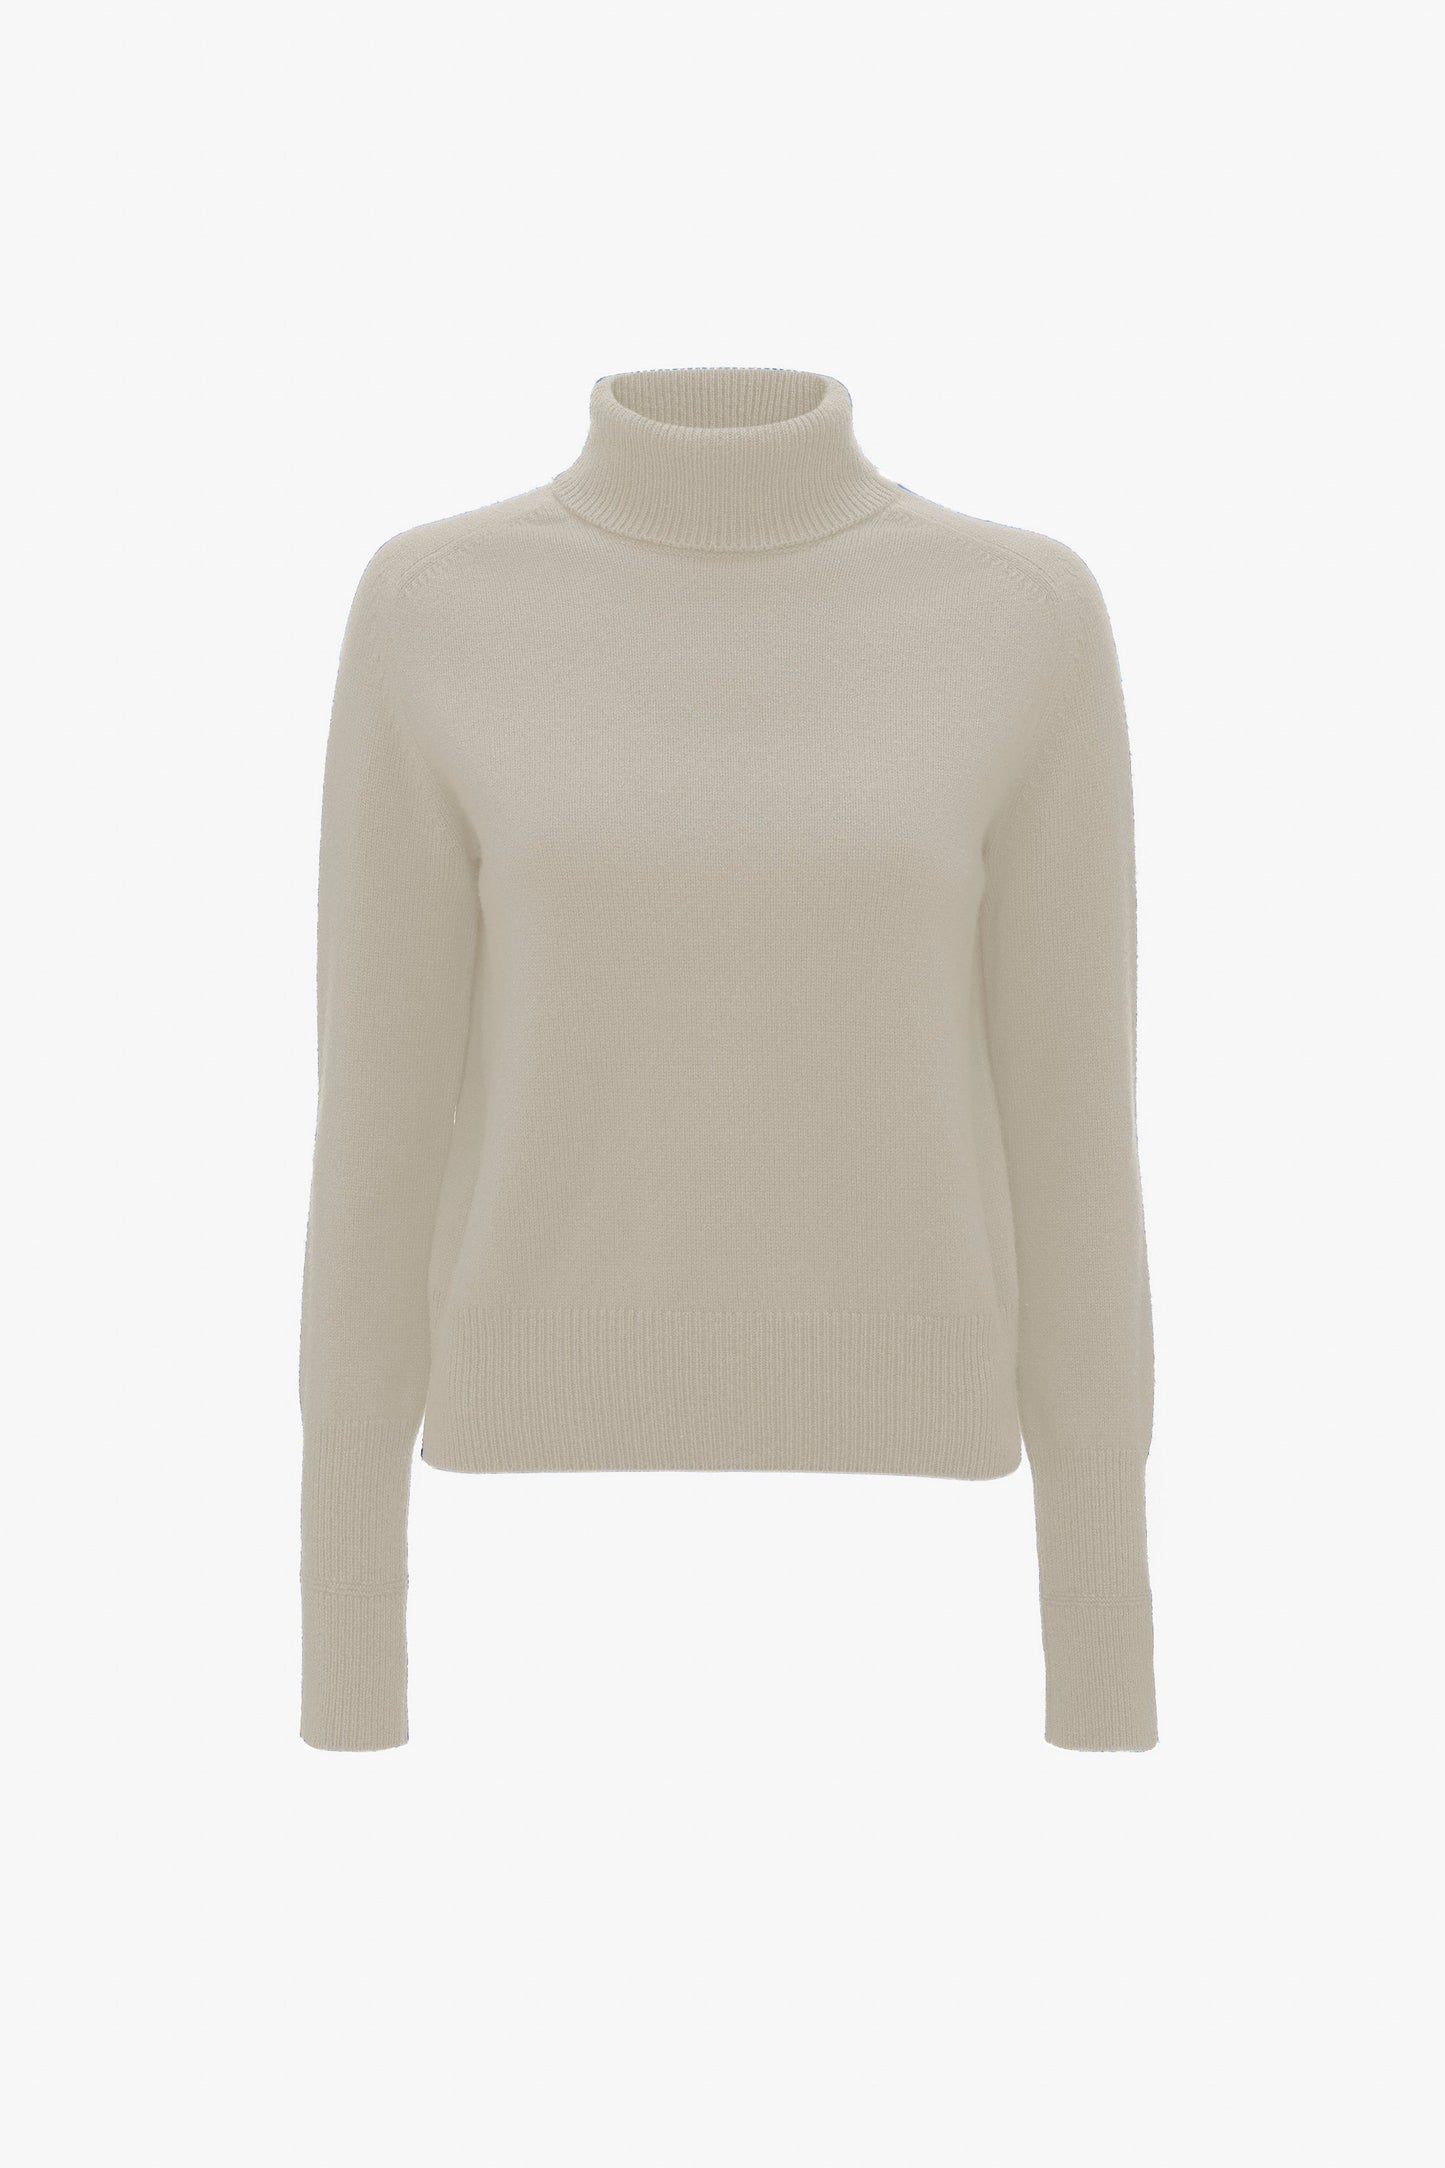 A Victoria Beckham Polo Neck Jumper In Ivory displayed on a white background.